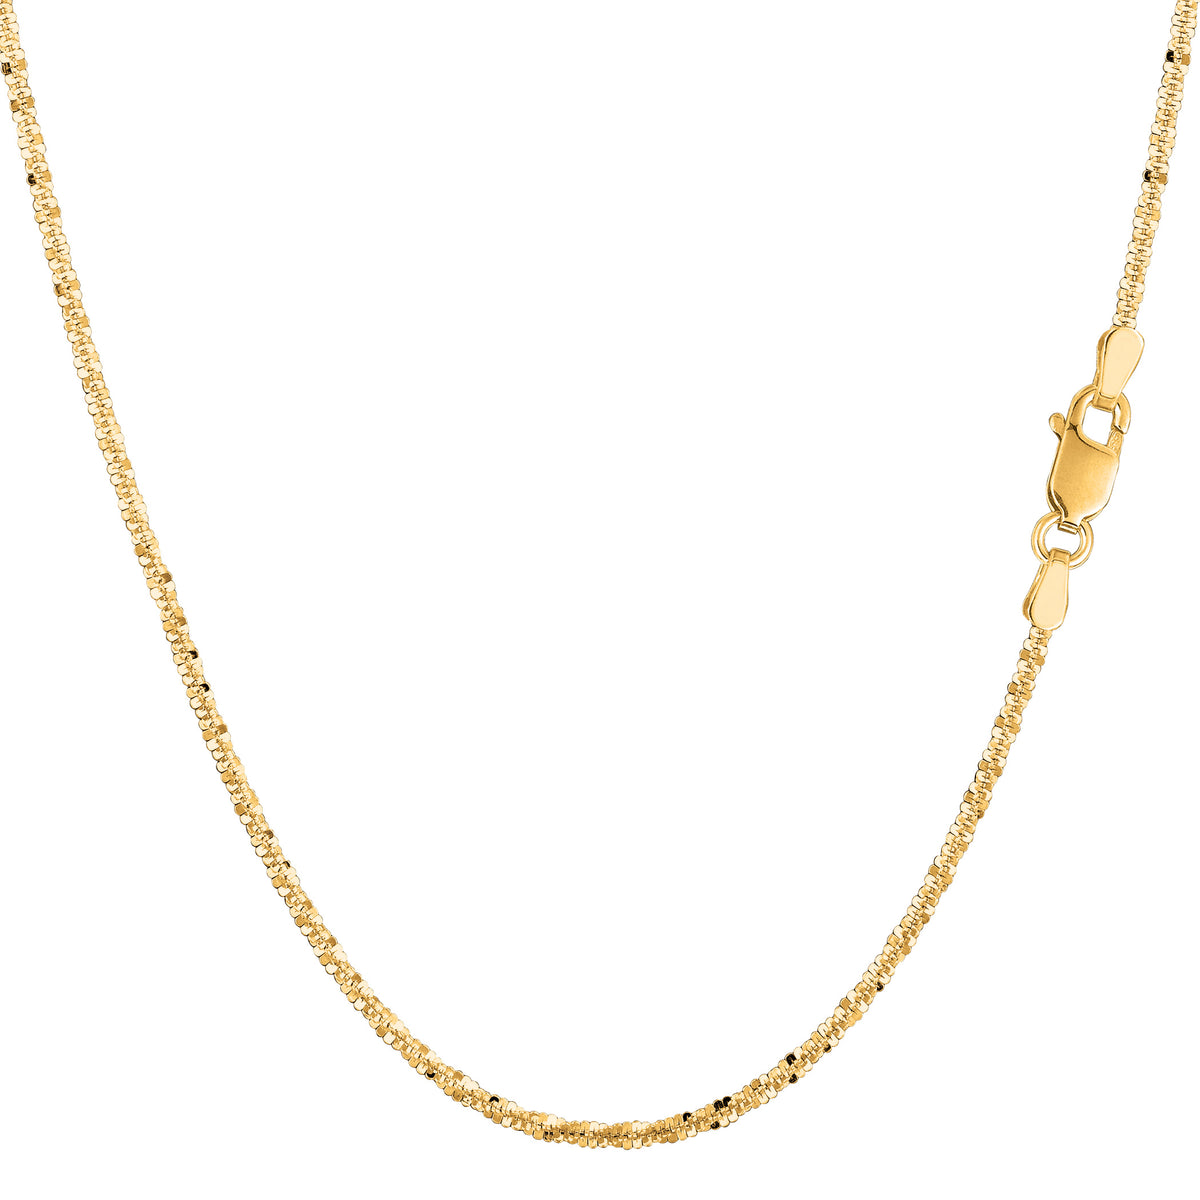 14k Yellow Gold Sparkle Chain Bracelet, 1.5mm, 10" fine designer jewelry for men and women